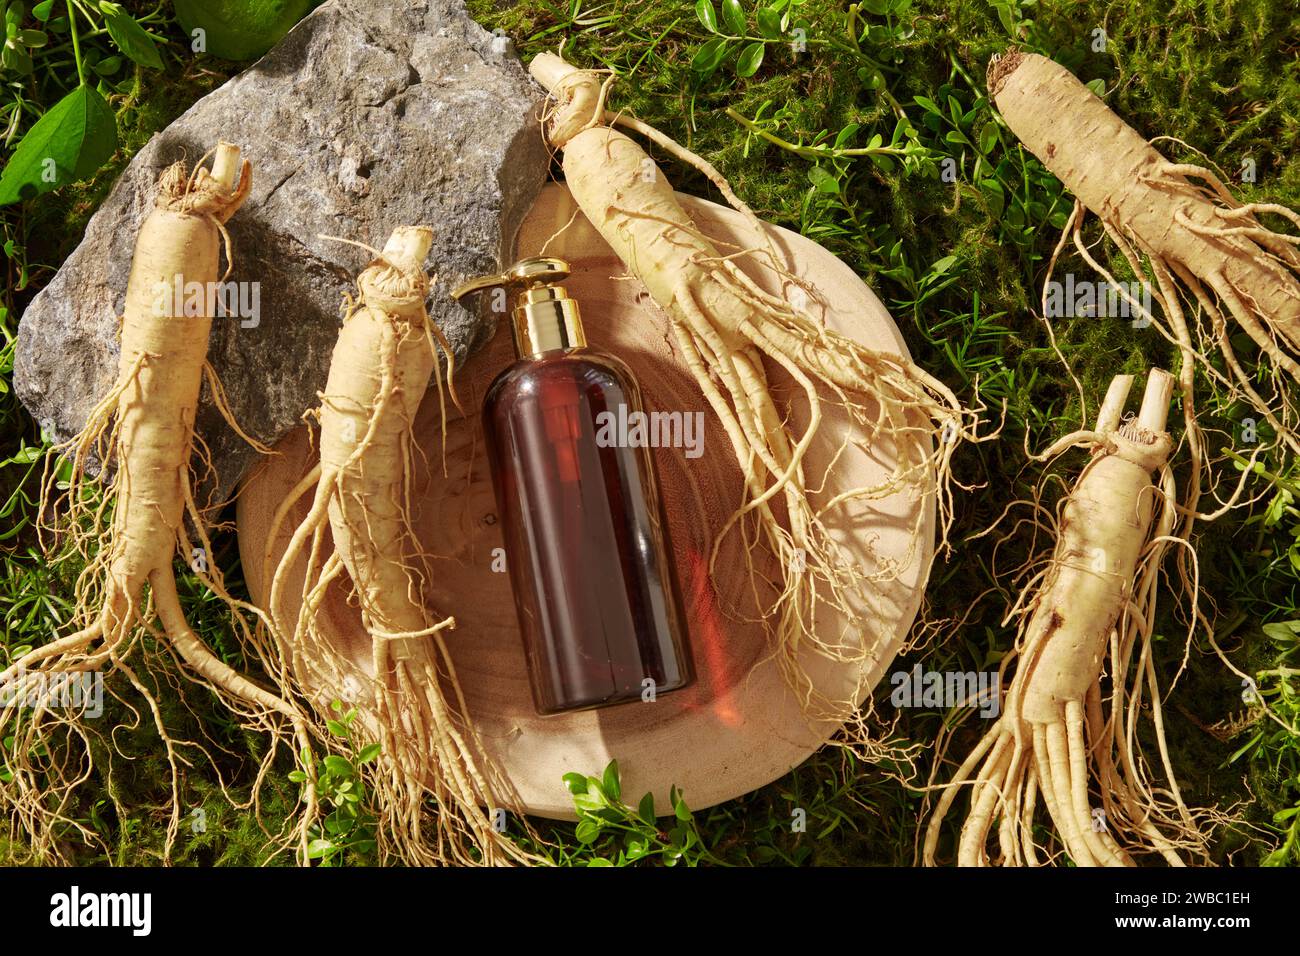 An amber bottle unbranded displayed on wooden tray with fresh ginseng roots and block of stone on green moss background. Mockup scene for advertising Stock Photo